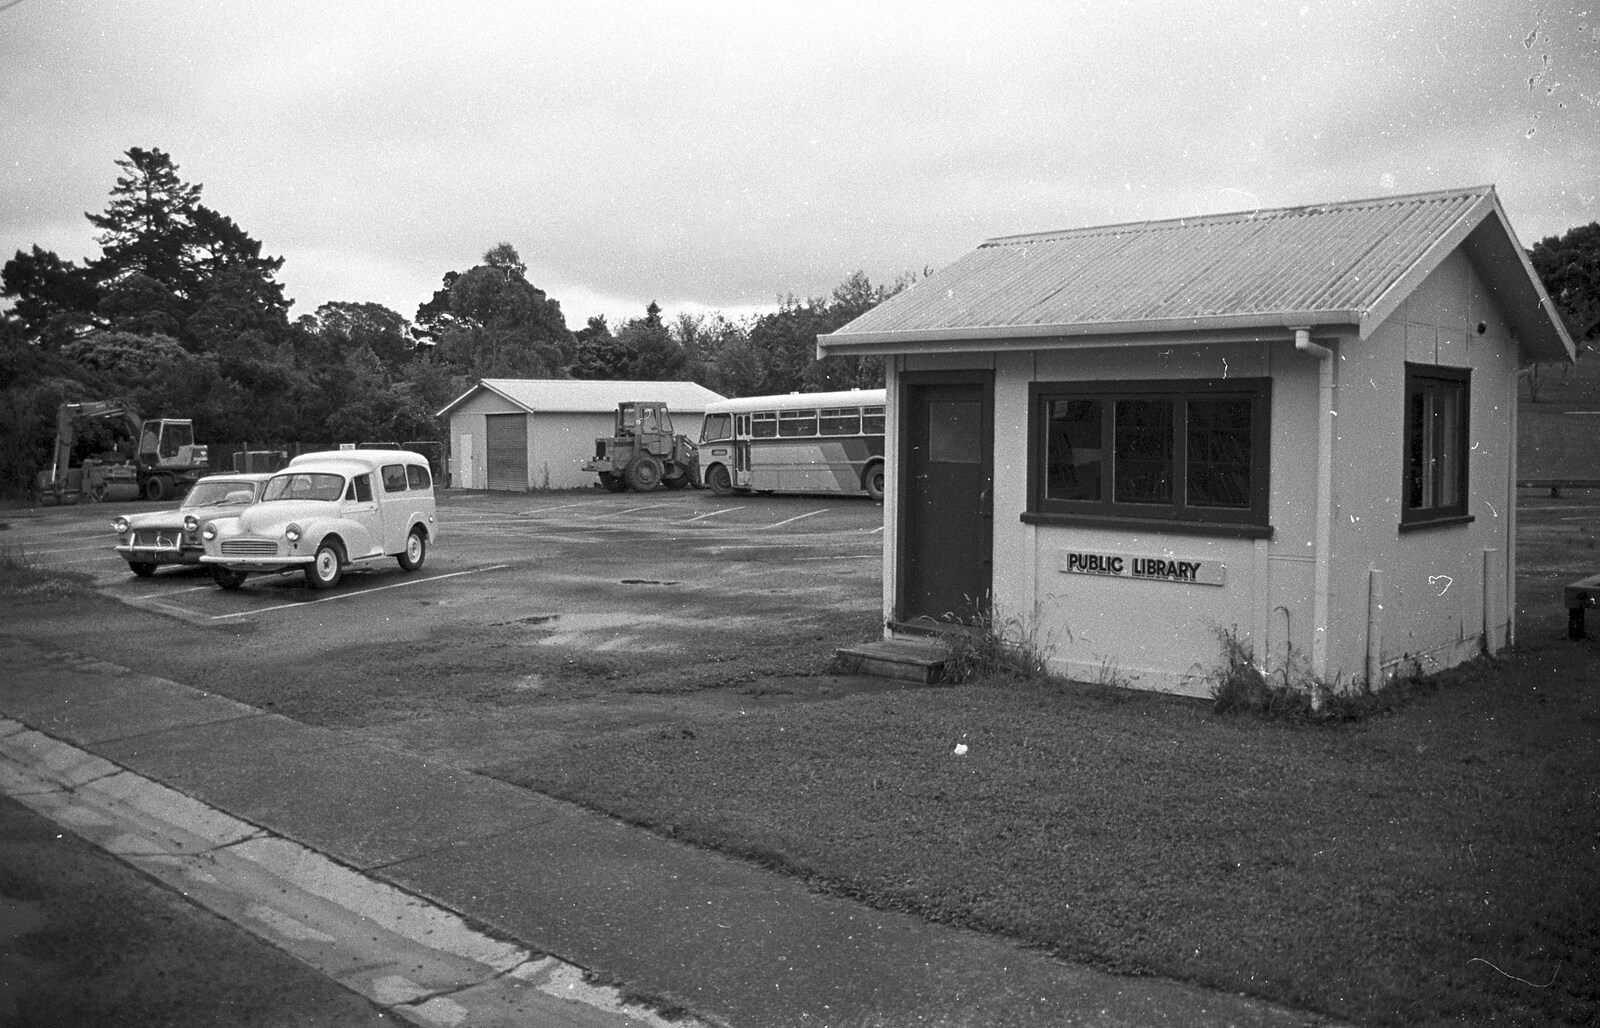 The Ferry Landing library, and some classic cars from Ferry Landing, Whitianga, New Zealand - 23rd November 1992